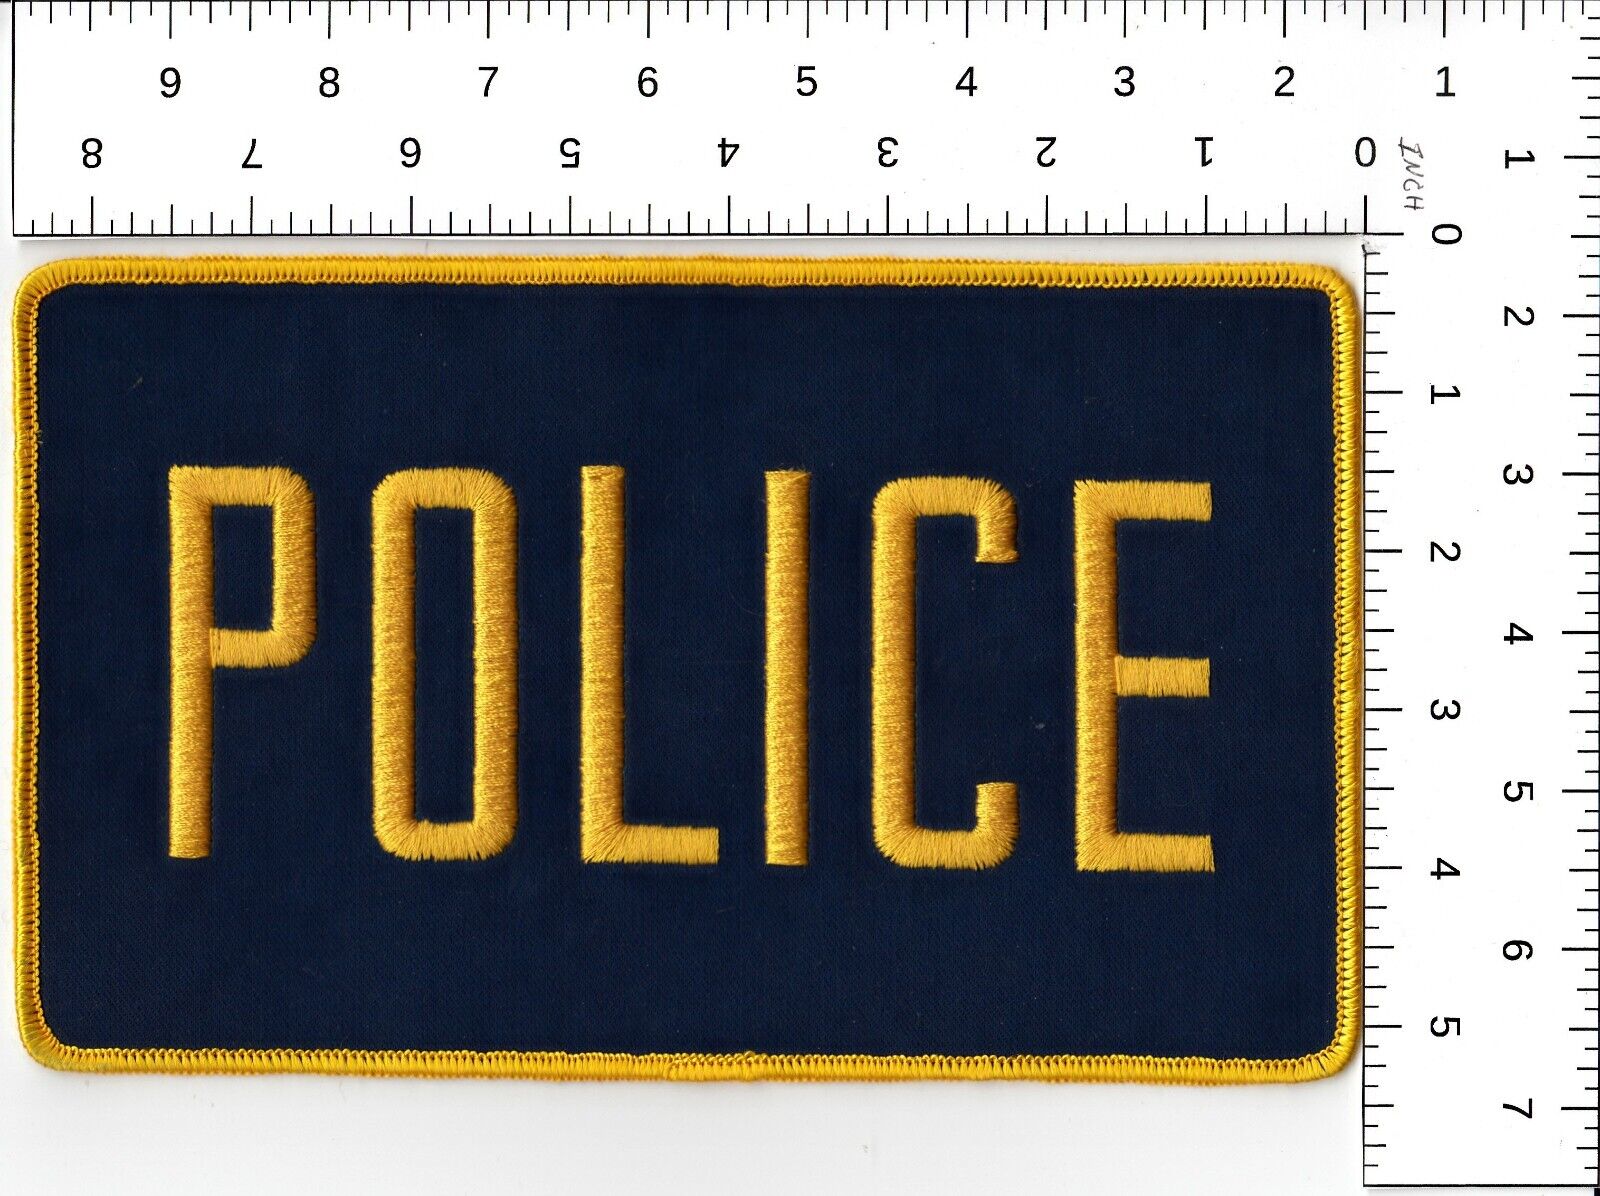 LARGE (8 1/2 X 5 1/8) POLICE JACKET DISPLAY EMBROIDERED CLOTH PATCH